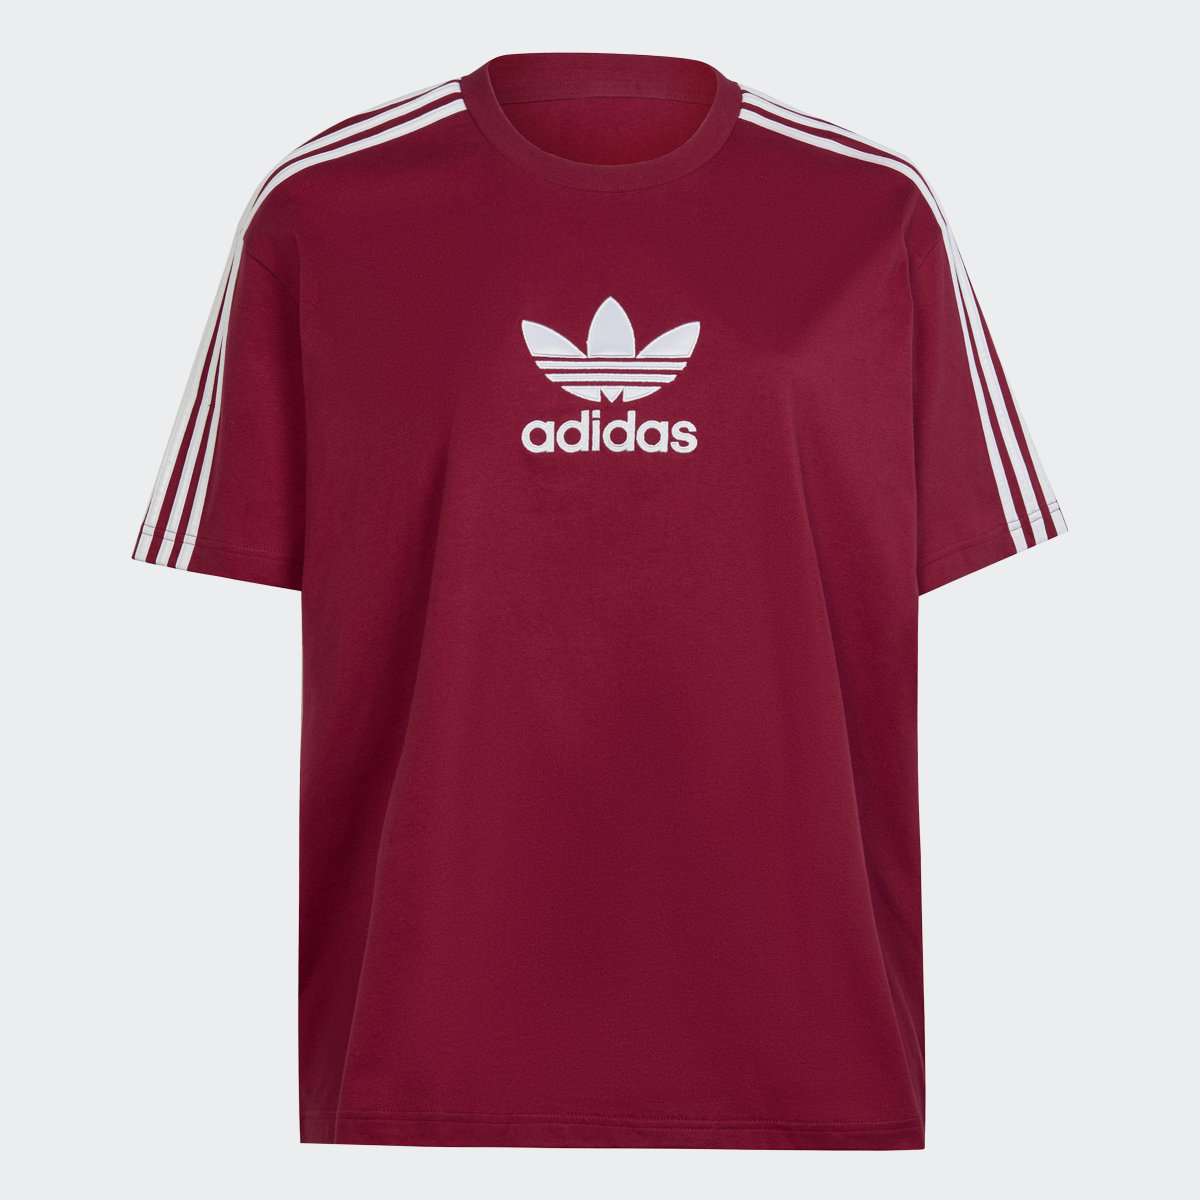 Adidas Centre Stage Tee (Plus Size). 4